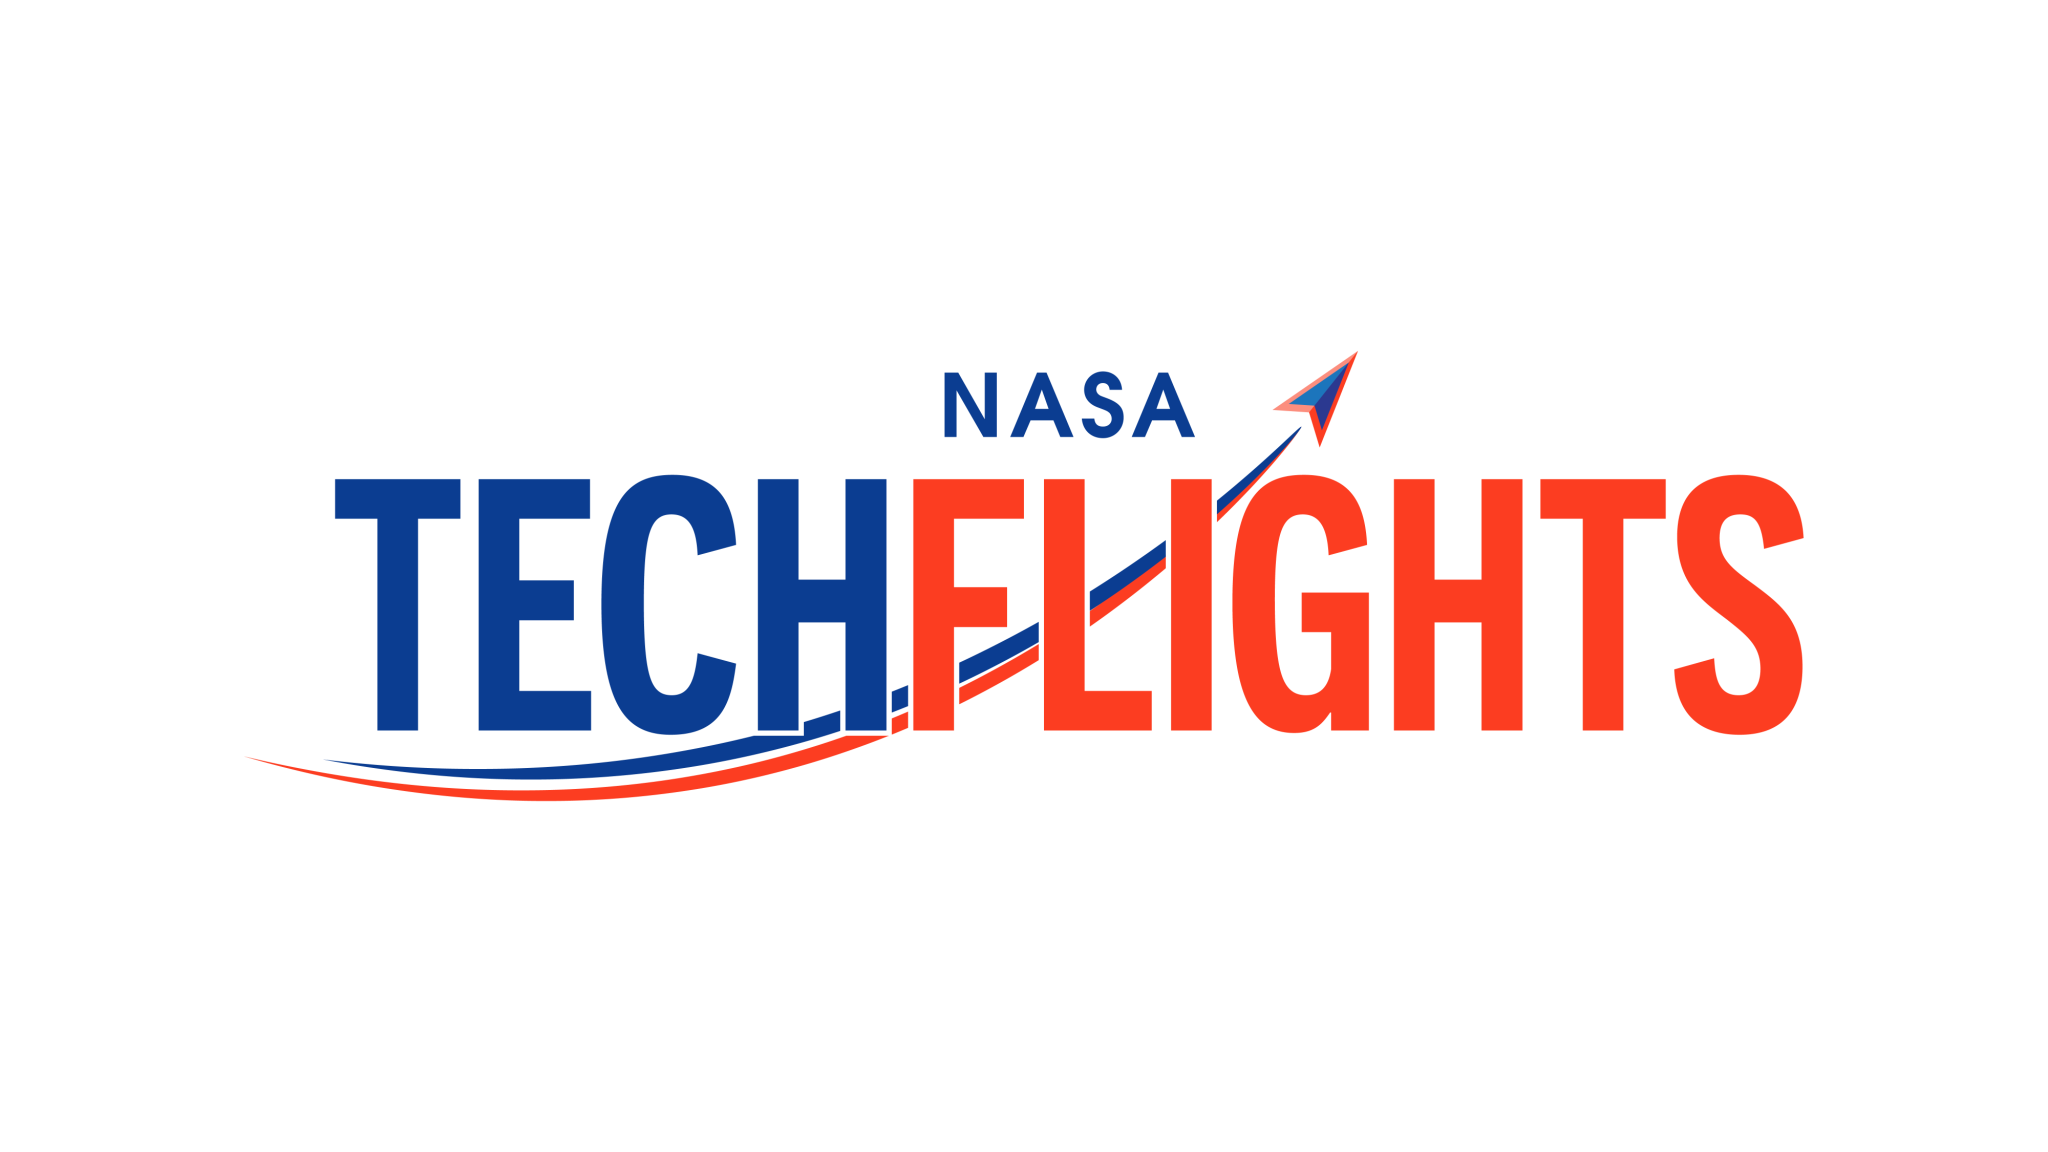 NASA above Tech (in blue) Flights (in red) with a triangular icon of a flight vehicle swooping upward behind the words, leaving a blue and red trail